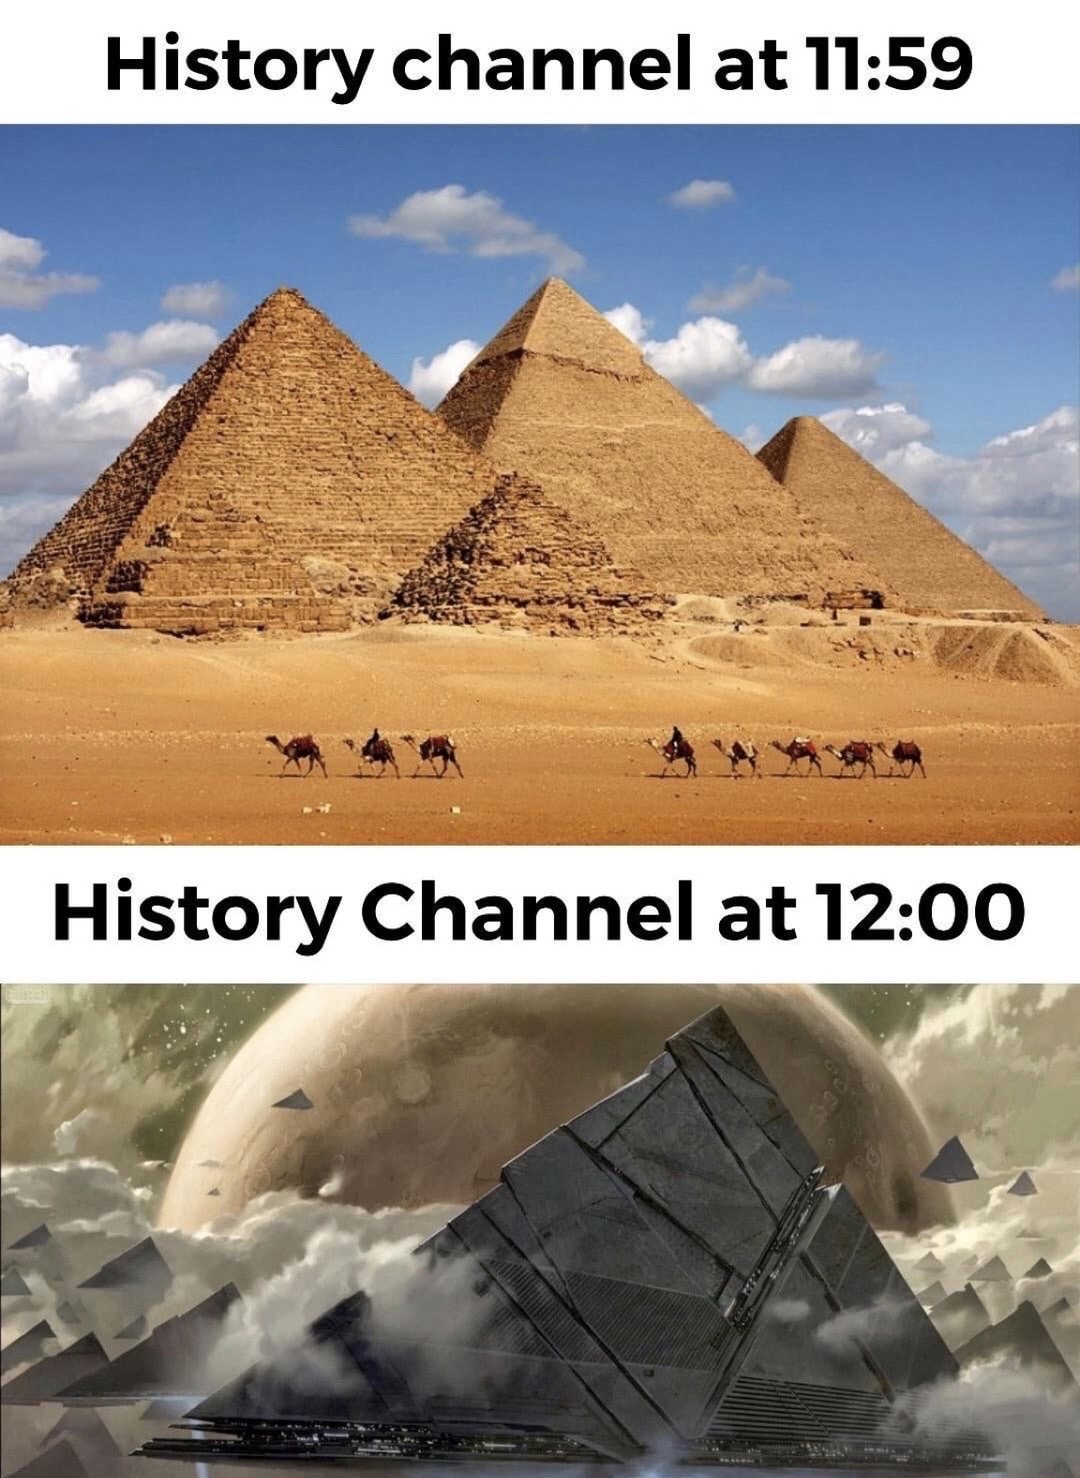 destiny 2 moon pyramid - History channel at History Channel at